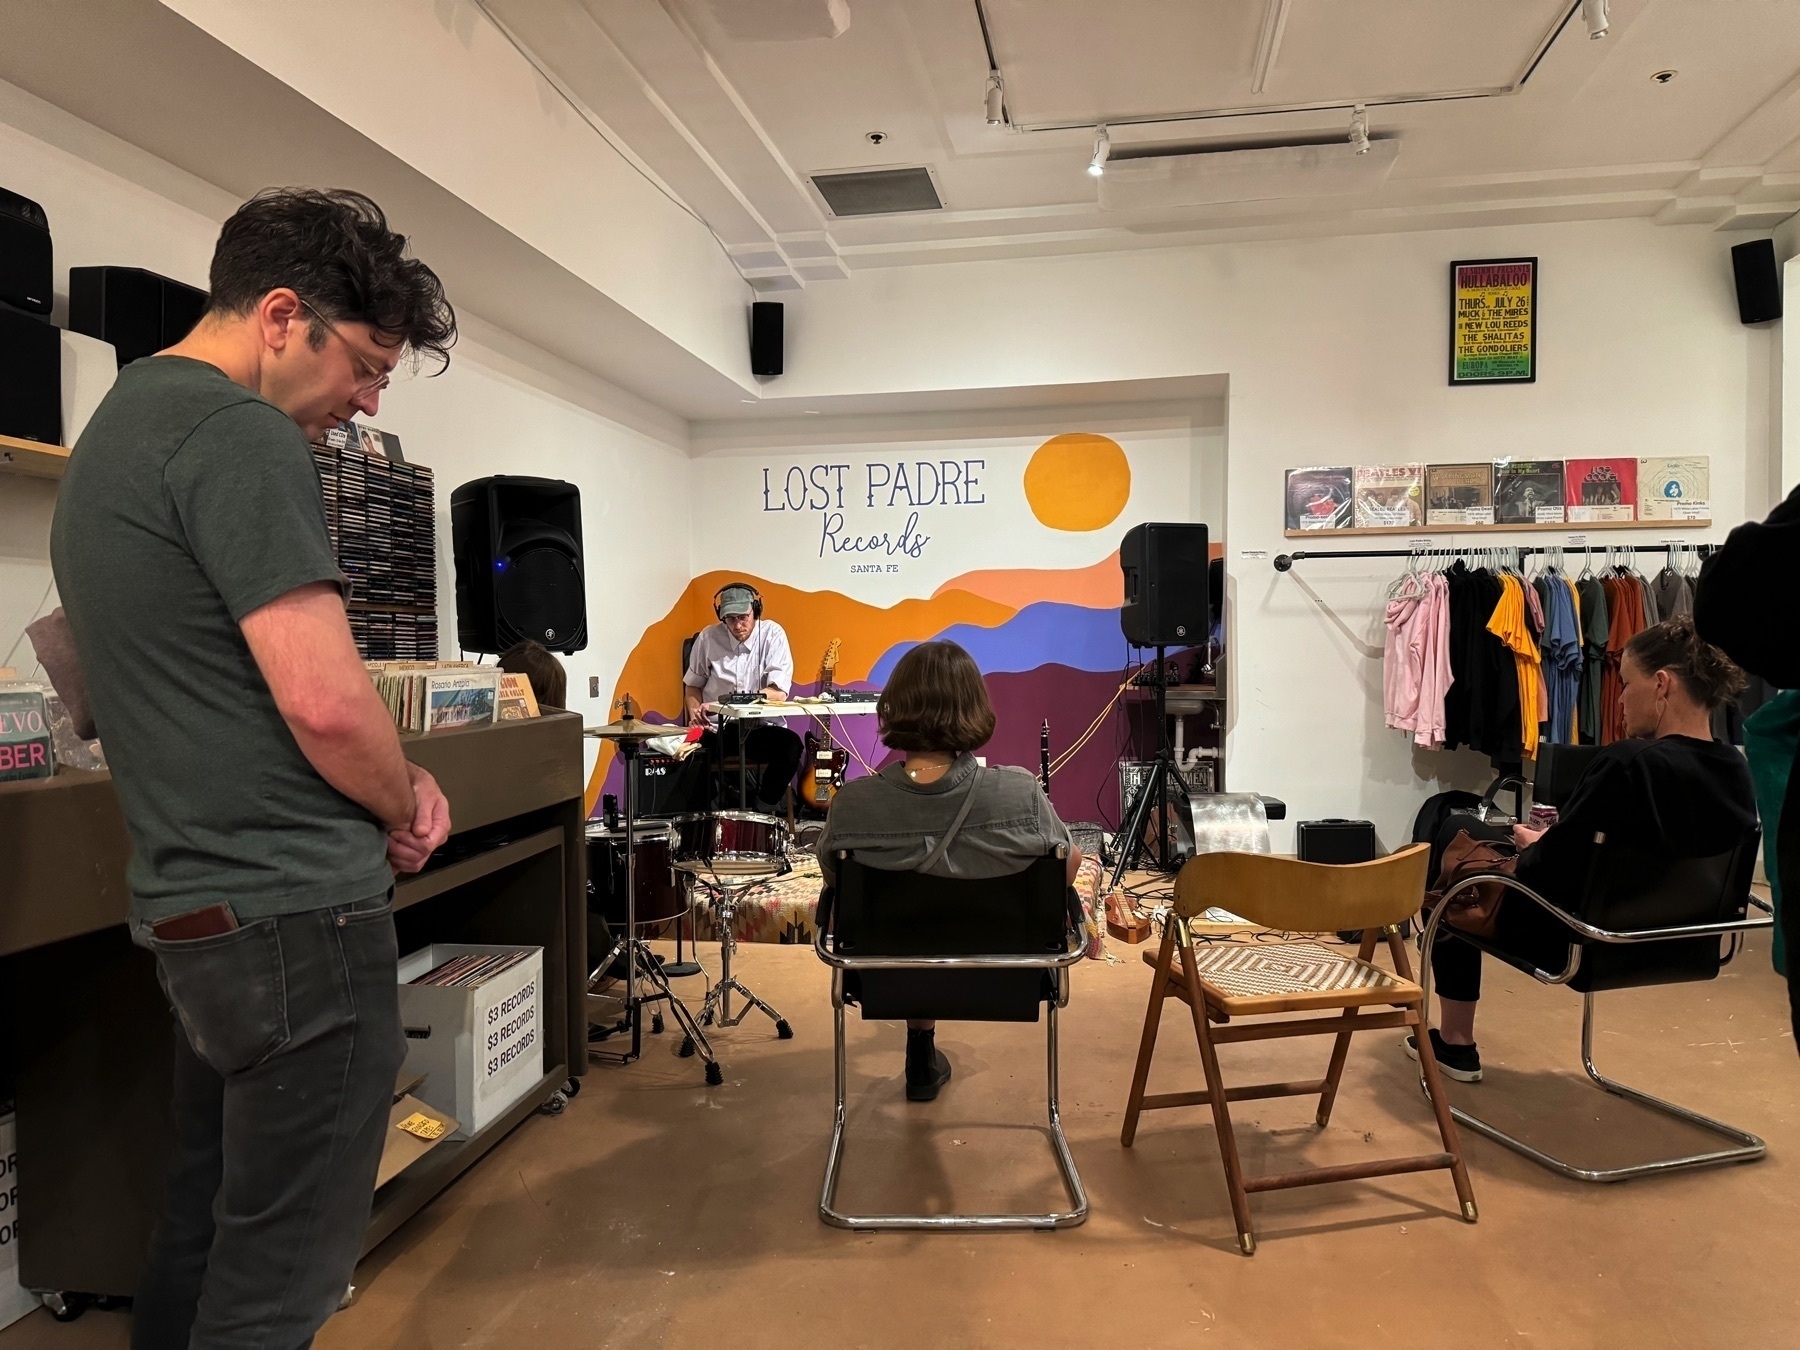 Man seated at table playing field recordings and noise on stage against Lost Padre Records, Santa Fe mural with seated and standing audience members between record store shelves